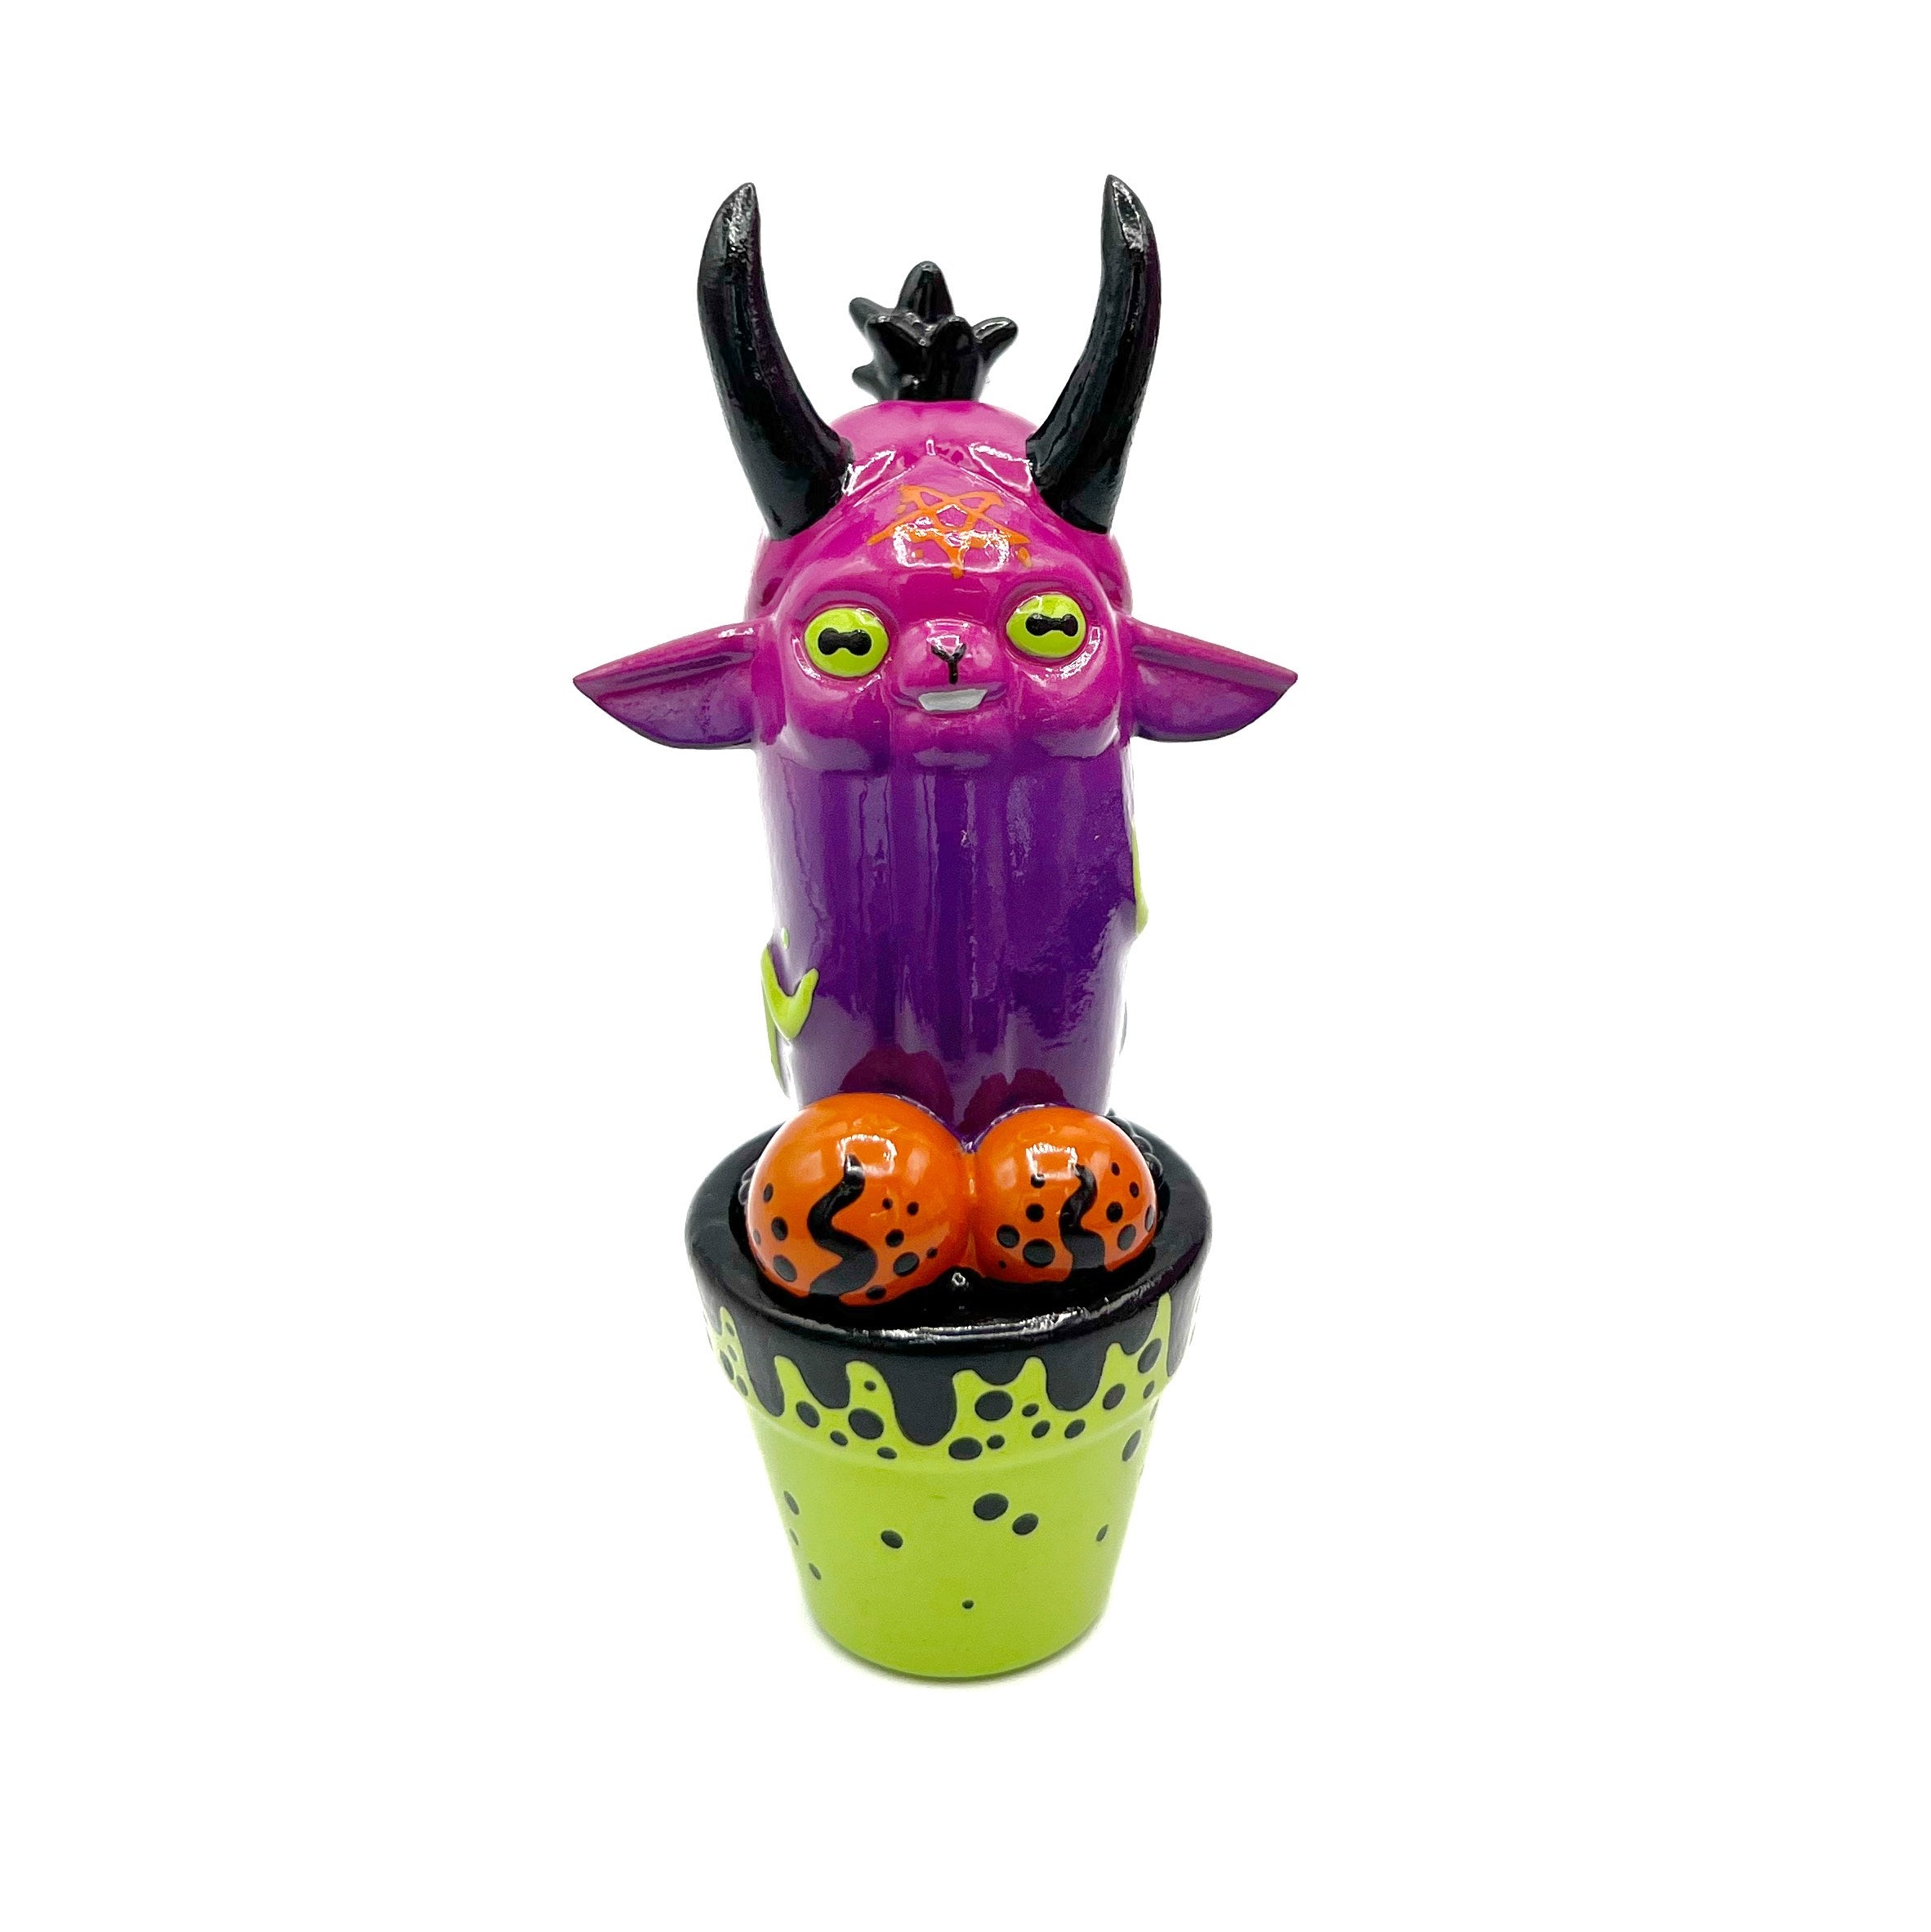 Simon Says Macy & Friends - East Van Satan by Ghostfox Toys: Monster figurine and toy with container and glass close-ups.